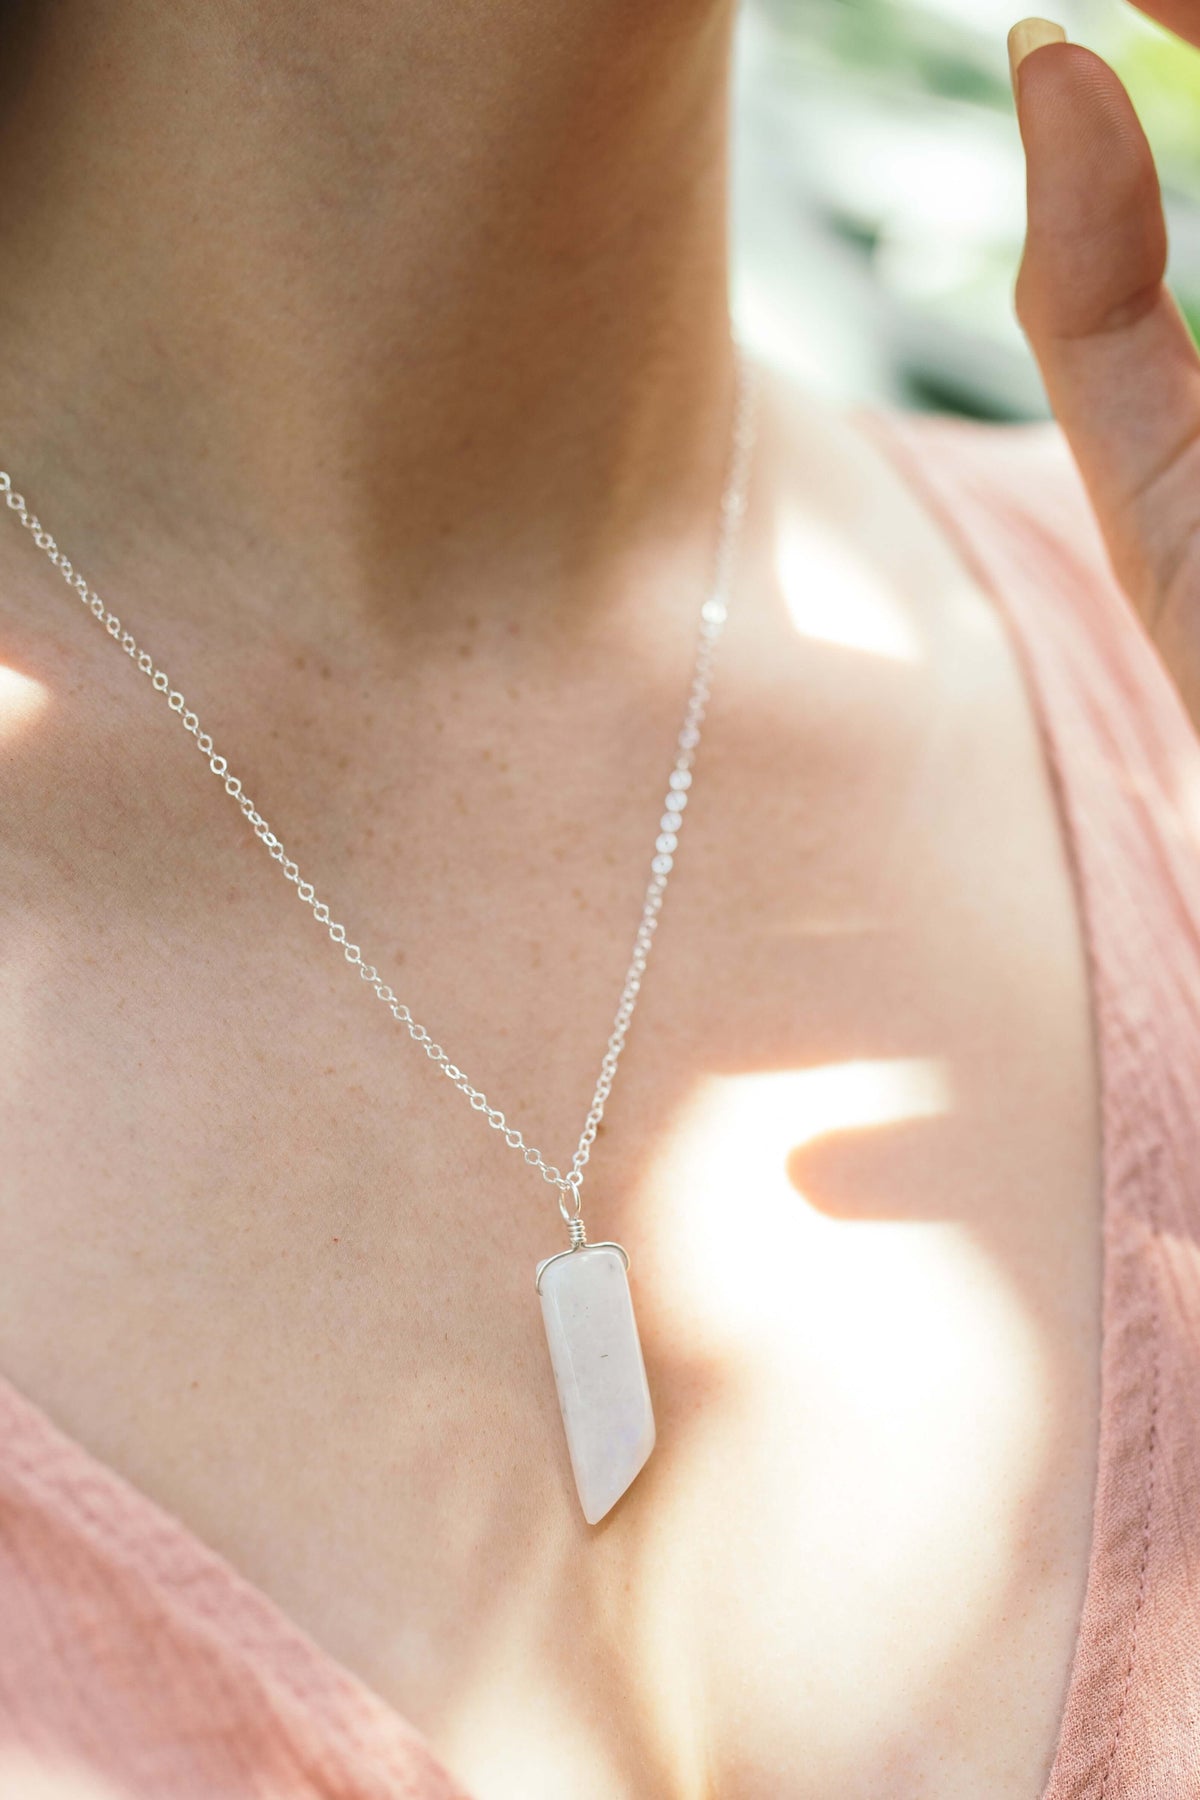 Smooth Point Pendant Necklace - Rainbow Moonstone - Sterling Silver - Luna Tide Handmade Jewellery